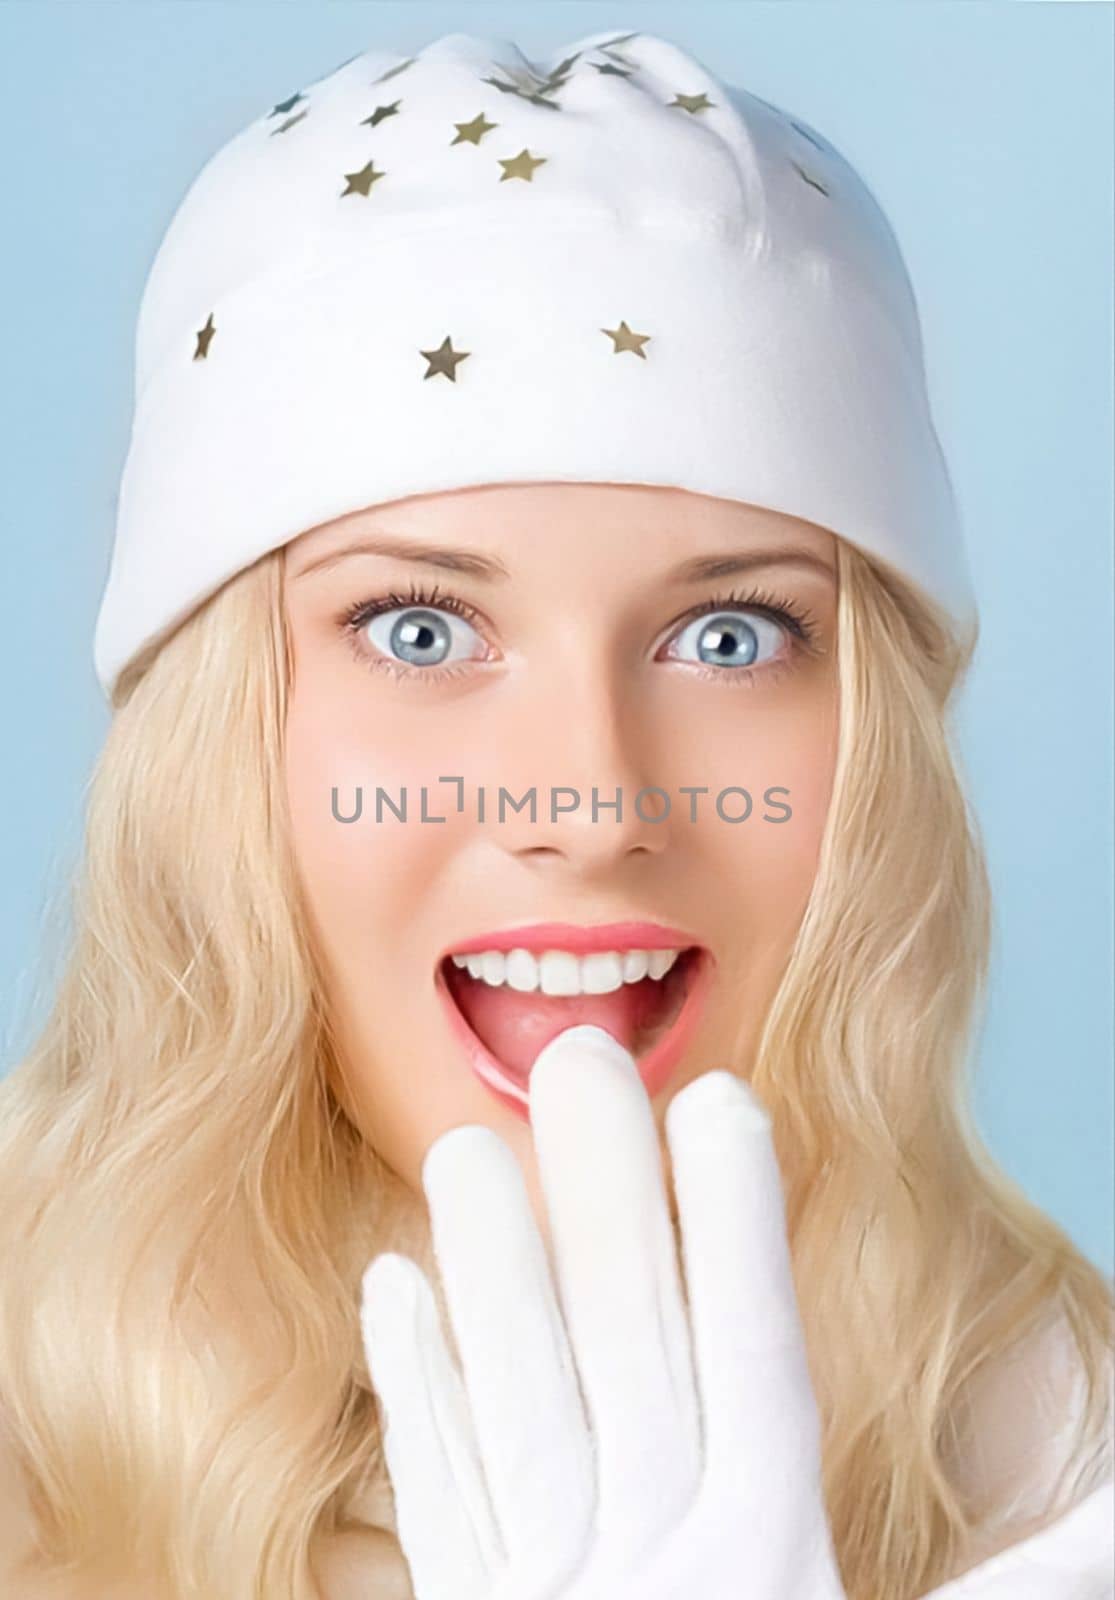 Girl with blond hair and blue eyes seems surprised and amused while smiling and enjoying the winter holiday season lifestyle.